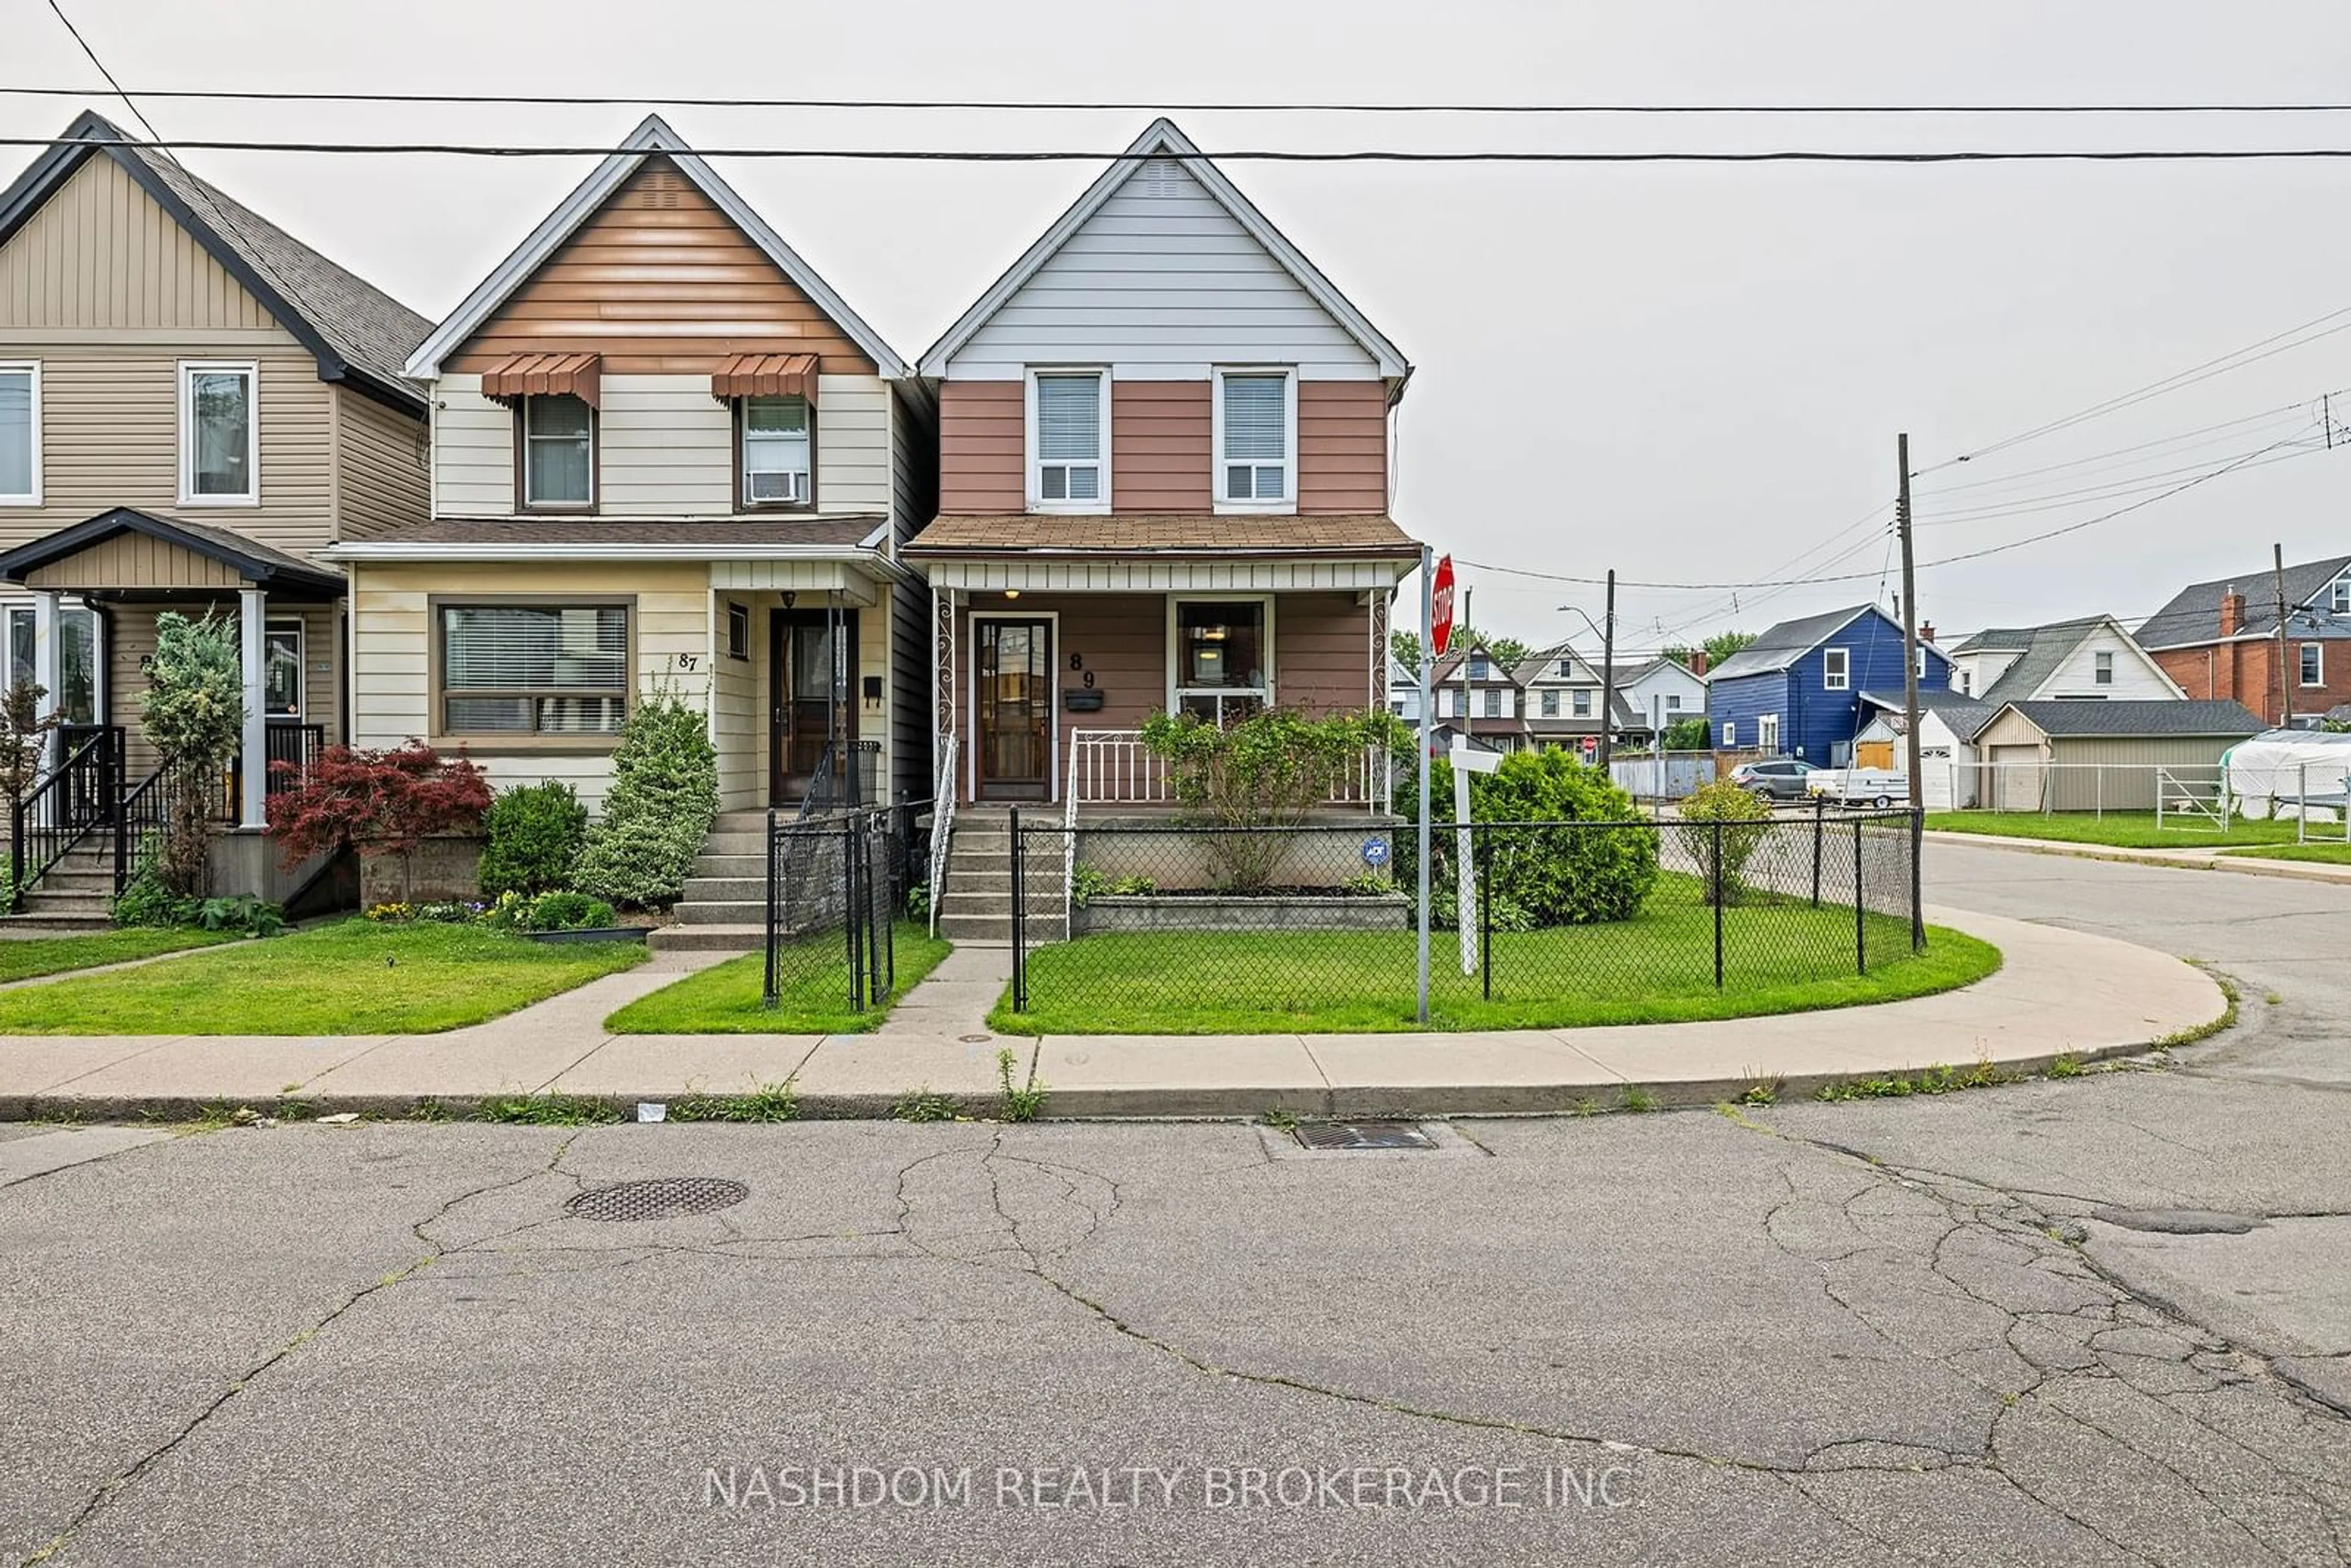 Street view for 89 Belview Ave, Hamilton Ontario L8L 7K7